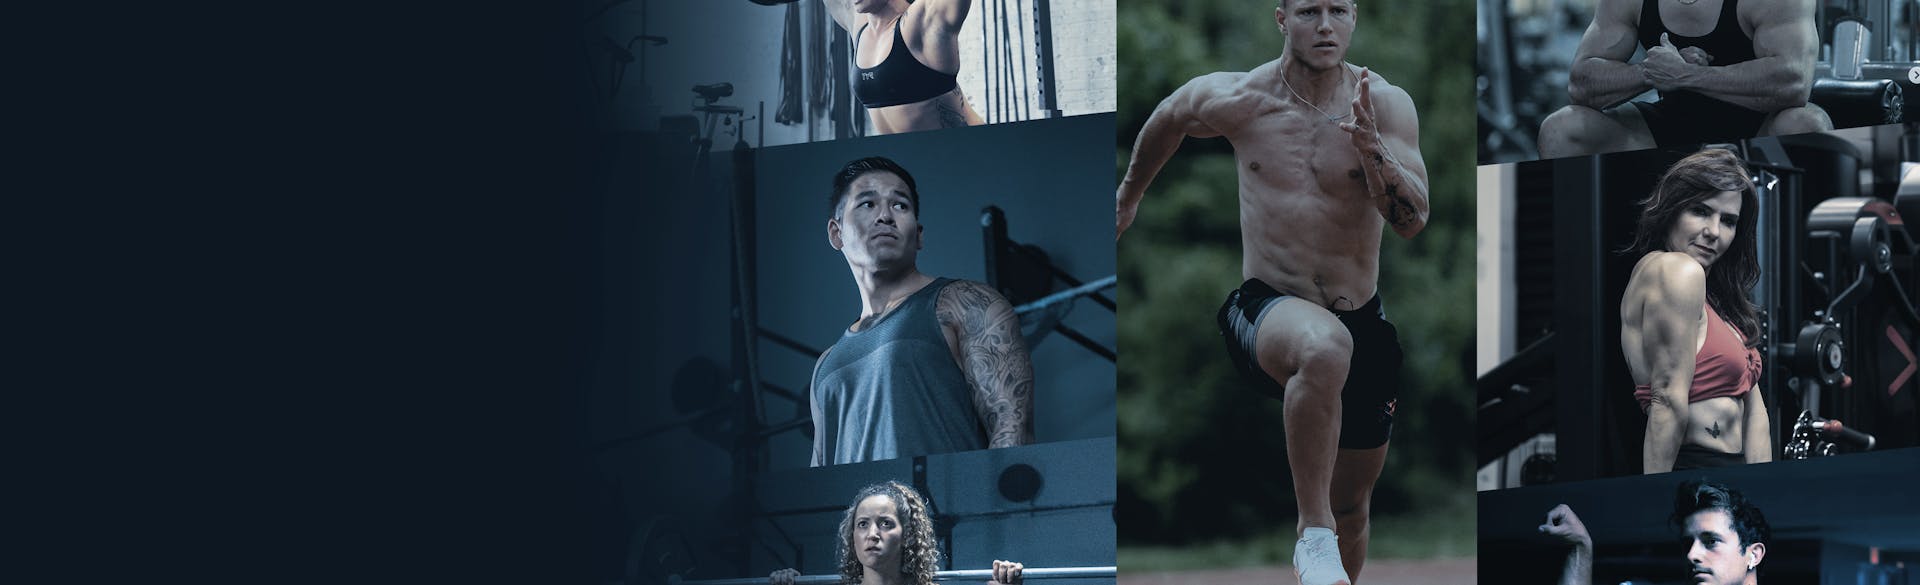 Collage featuring images seven Squad athletes working out in the gym or on the track